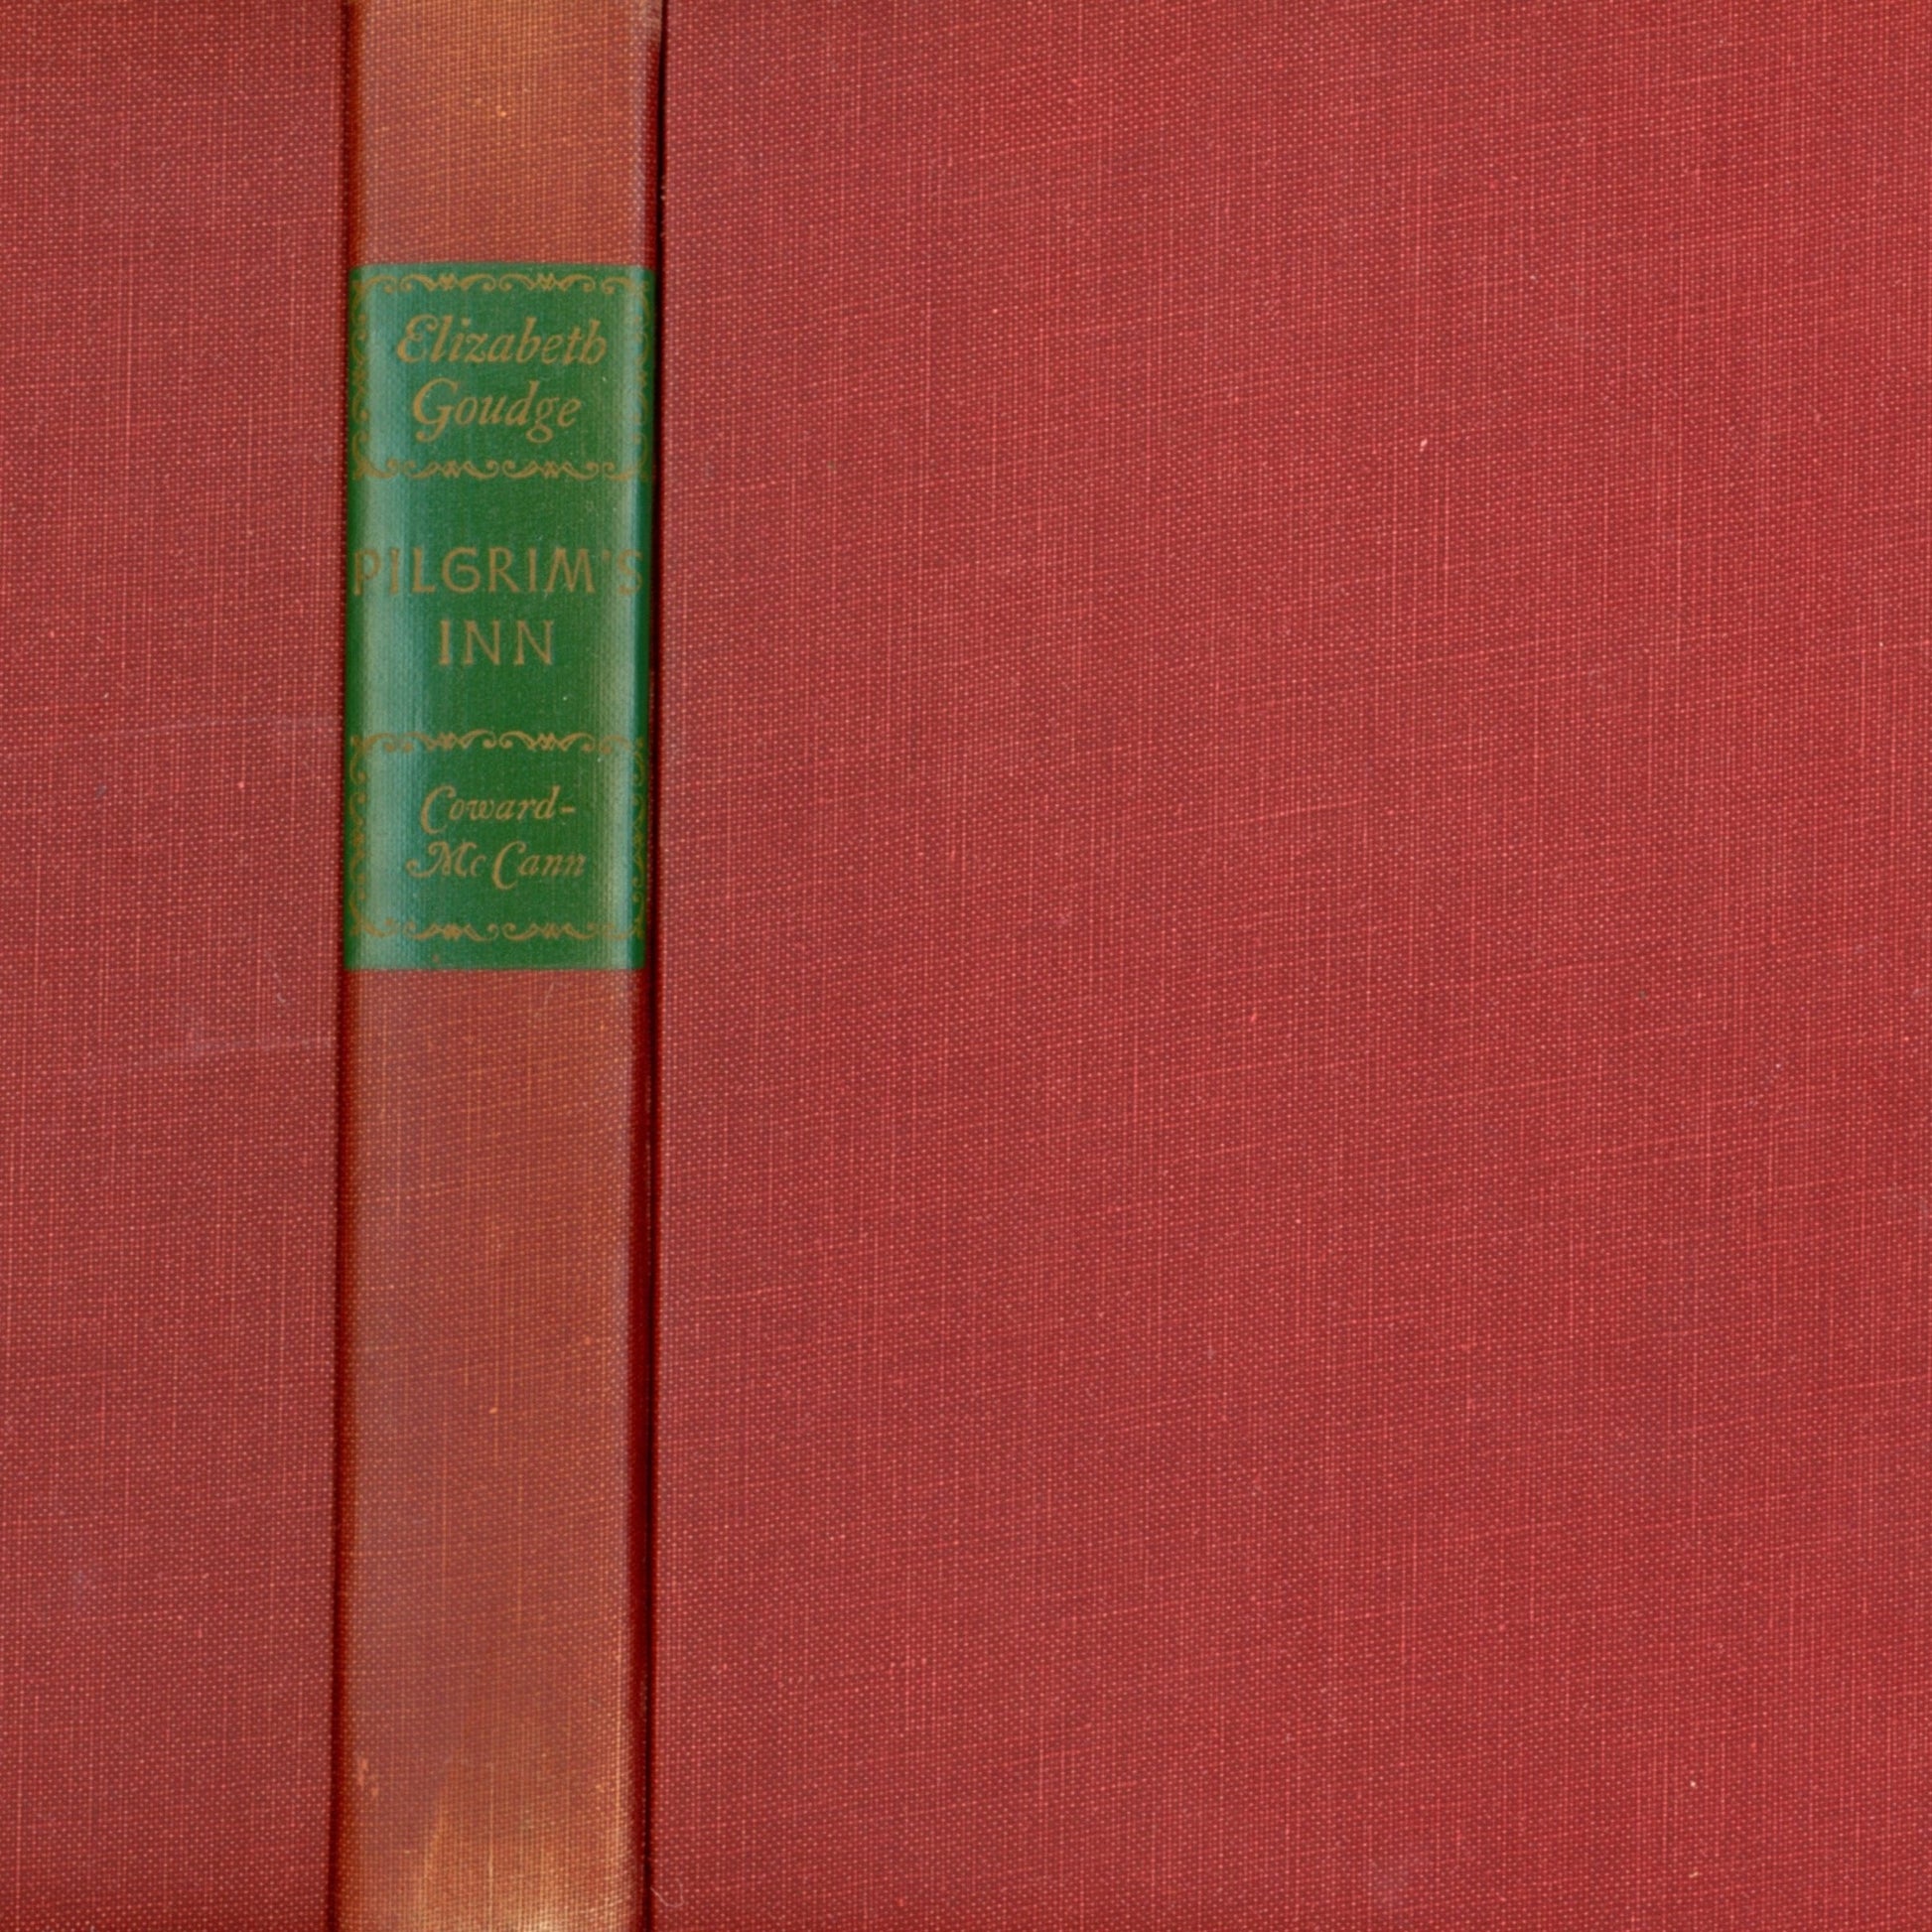 PILGRIM'S INN: The Herb of Grace by Elizabeth Goudge ©1948 First Edition